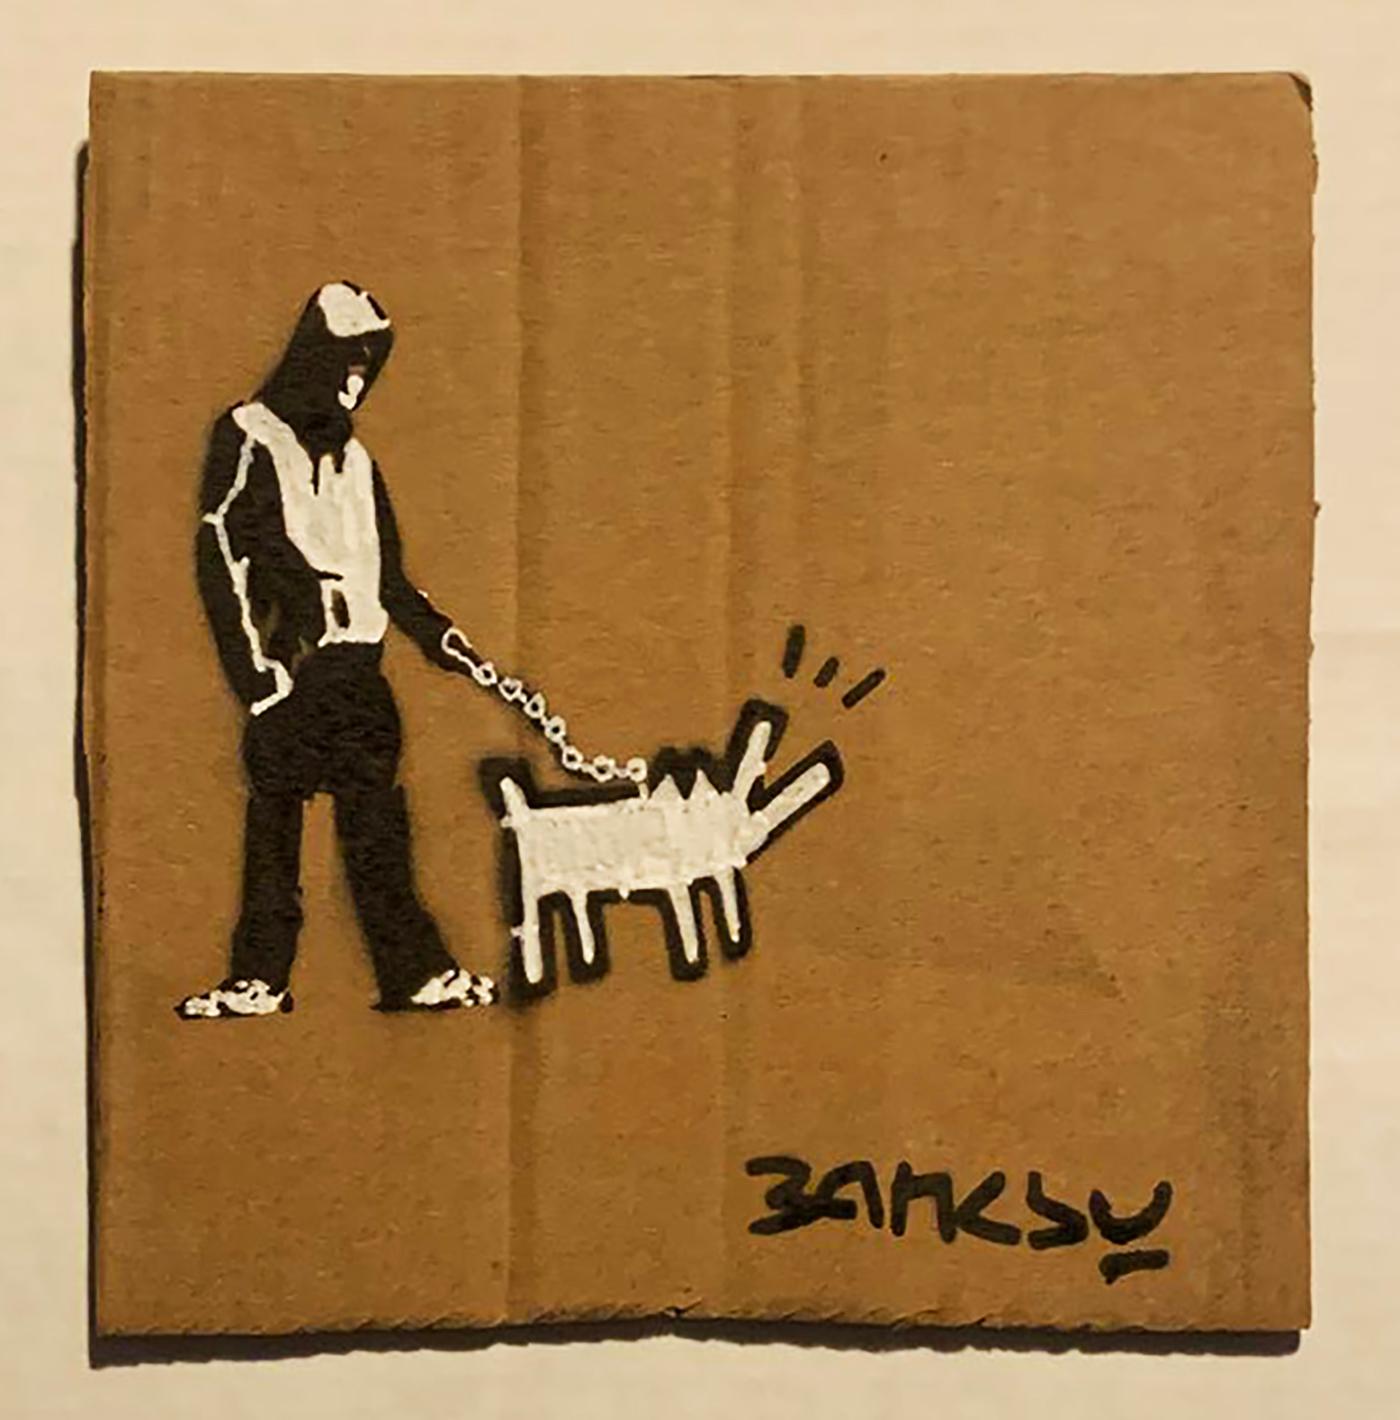 Banksy - Choose Your Weapon - Dismaland HPM Edition